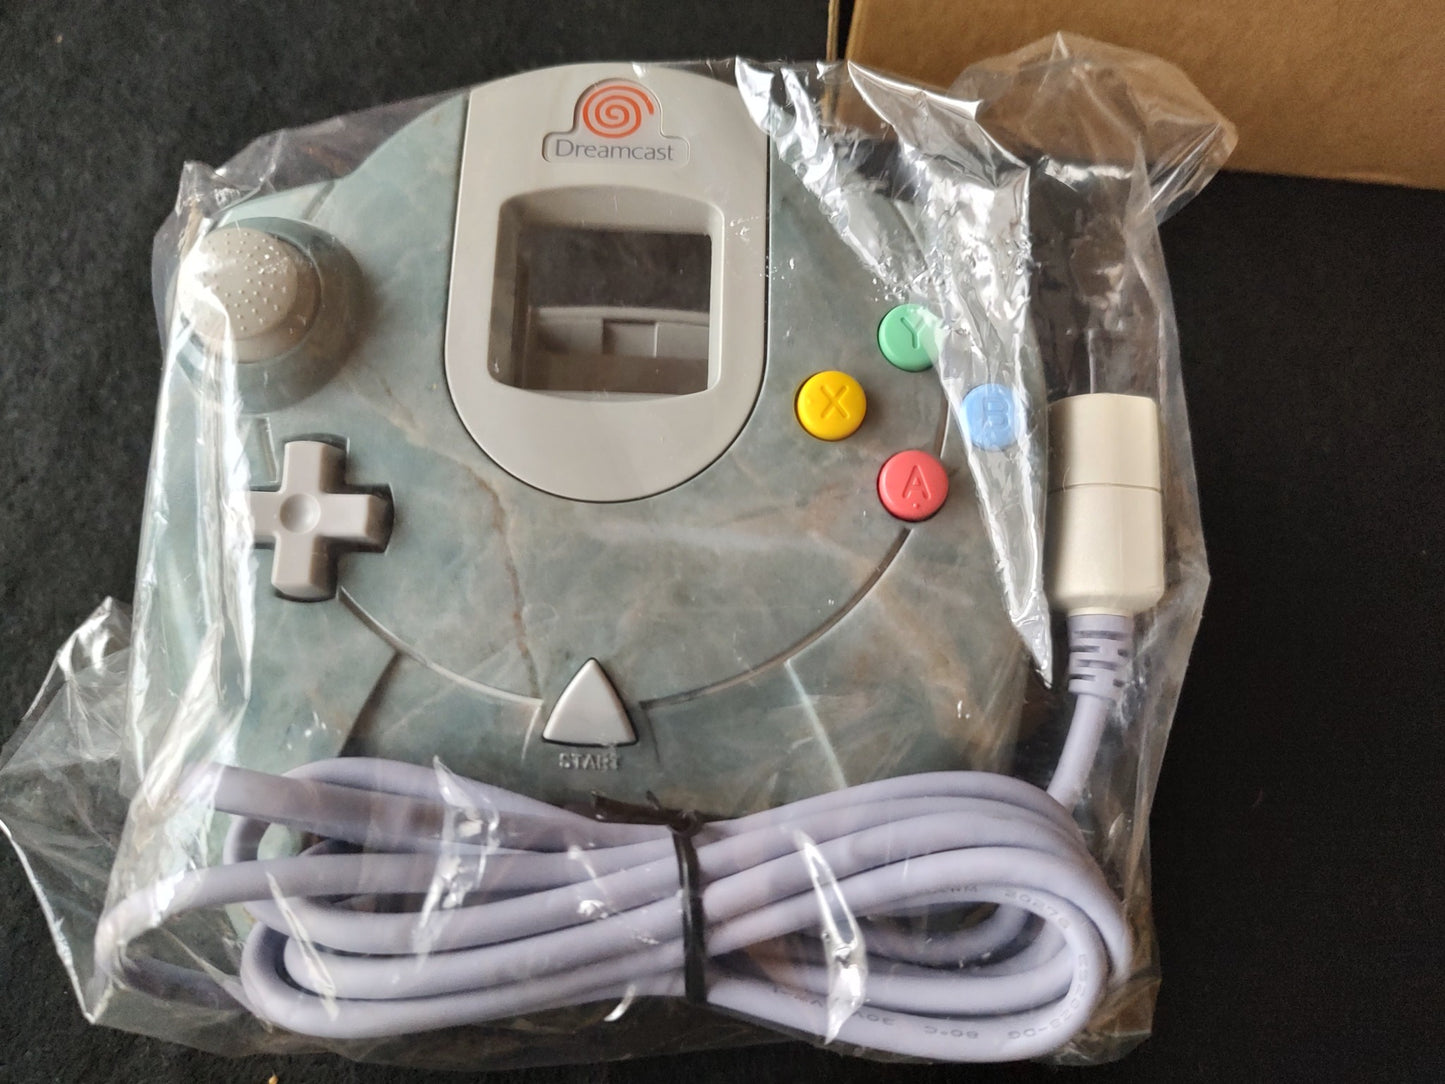 SEGA DreamCast Drean Bank Point HKT-7700 Marble Patern Controller with Box-f0113